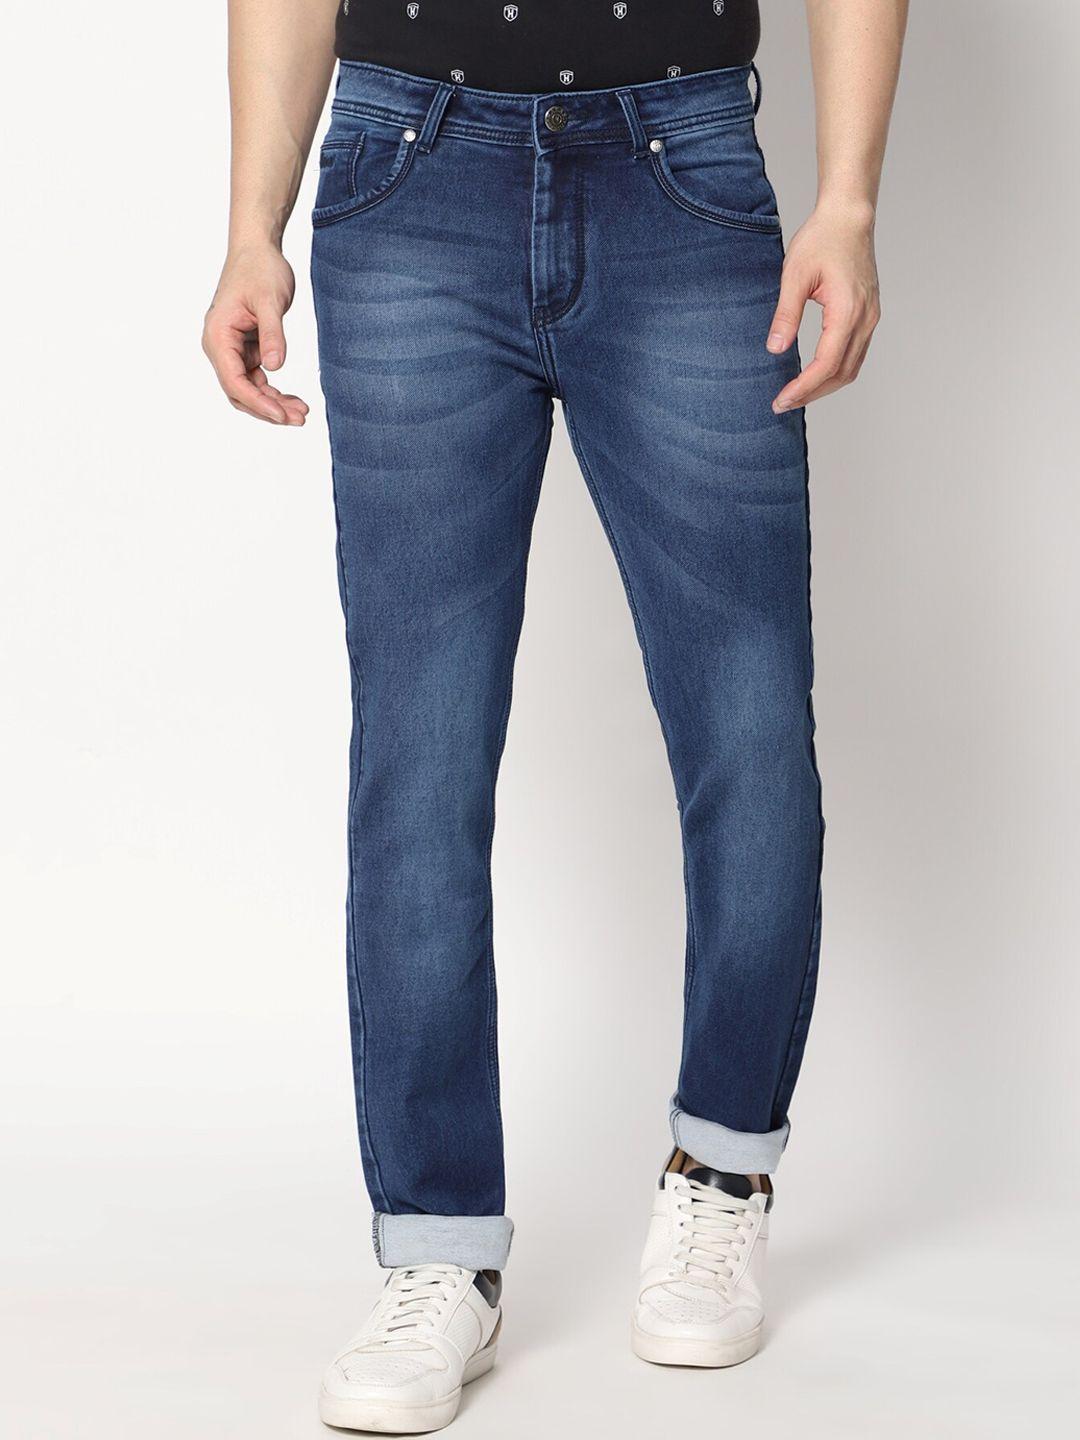 hj hasasi men navy blue light fade stretchable jeans